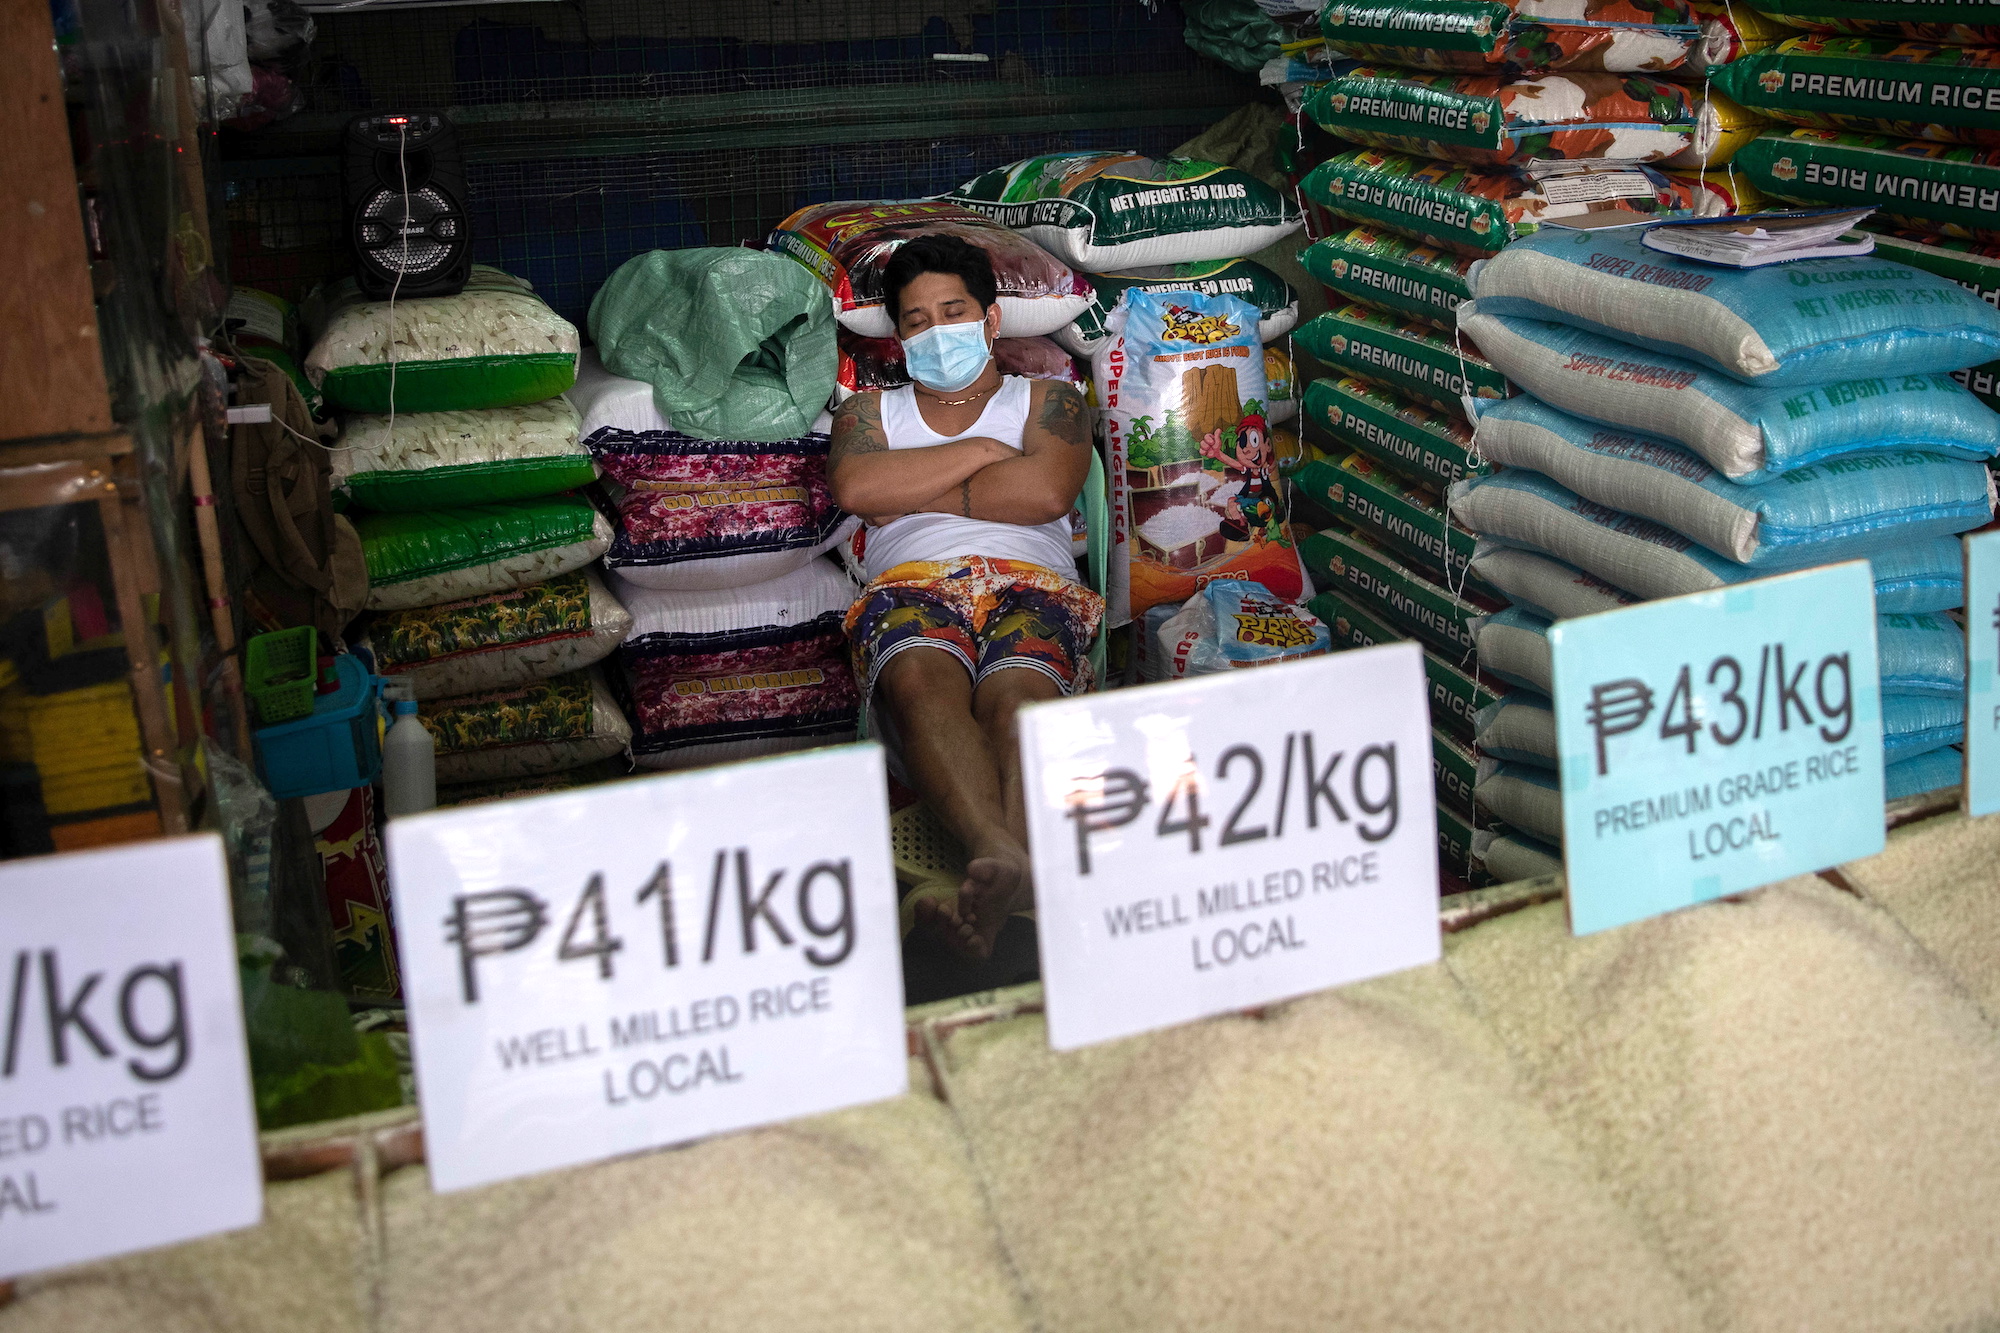 A vendor wearing a face mask for protection against the coronavirus disease (COVID-19) sleeps in a stall selling rice at a public market in Quezon City, Metro Manila, Philippines